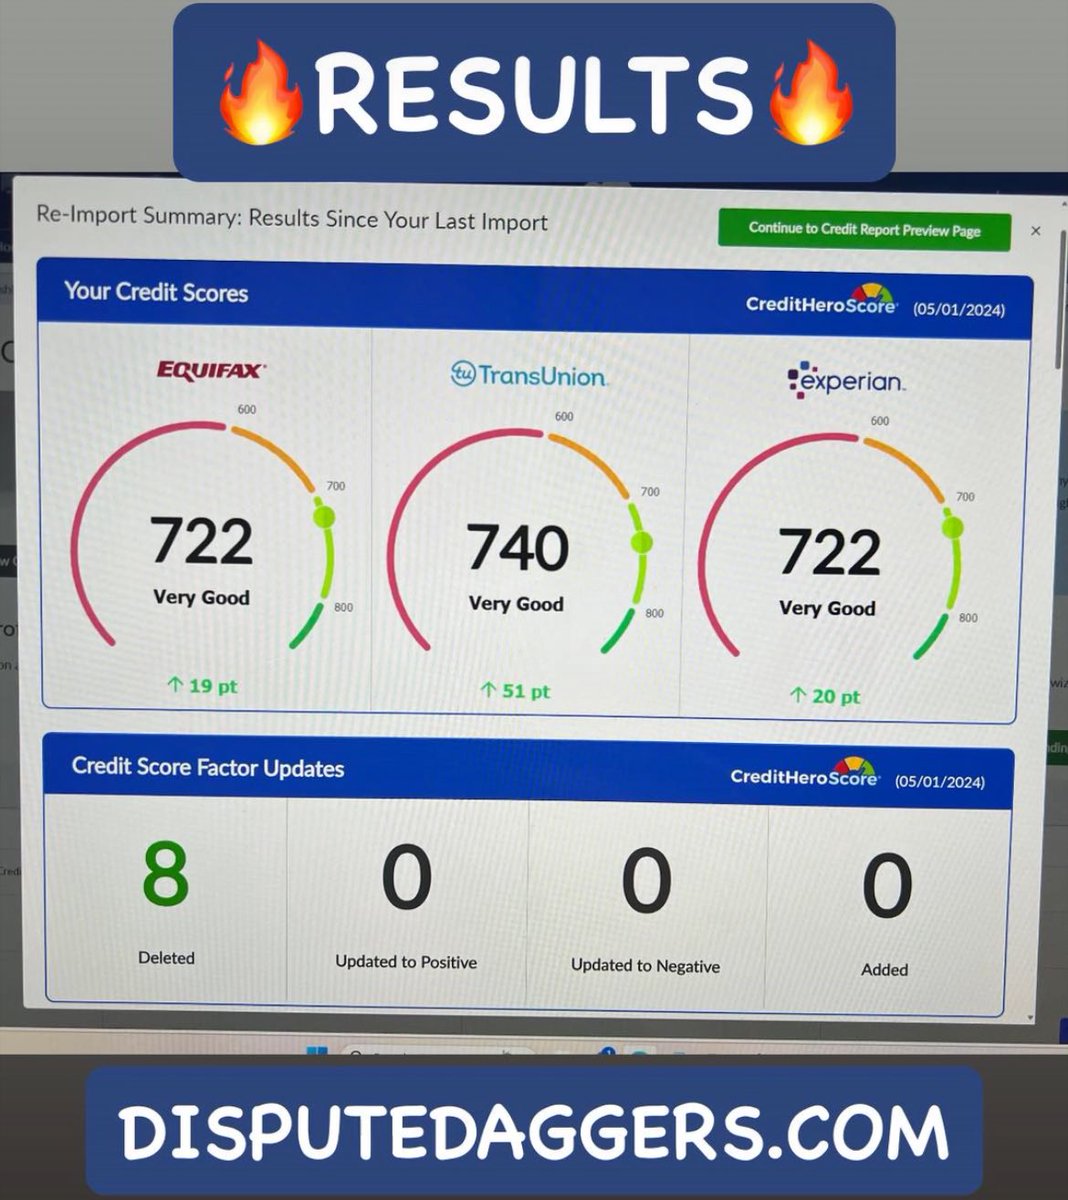 🗣️Y’all better stop playing with me!!! 
Holla at ya boi @DisputeDaggers.com and let me get you right in these Credit Streets. Face Gator!!! 🔥🔥🔥

#DisputeDaggersLLC
#CreditSolutions #Consultation
#CreditRepair #Credit #BusinessCredit #BusinessFunding #Leverage
#FinancialFreedom